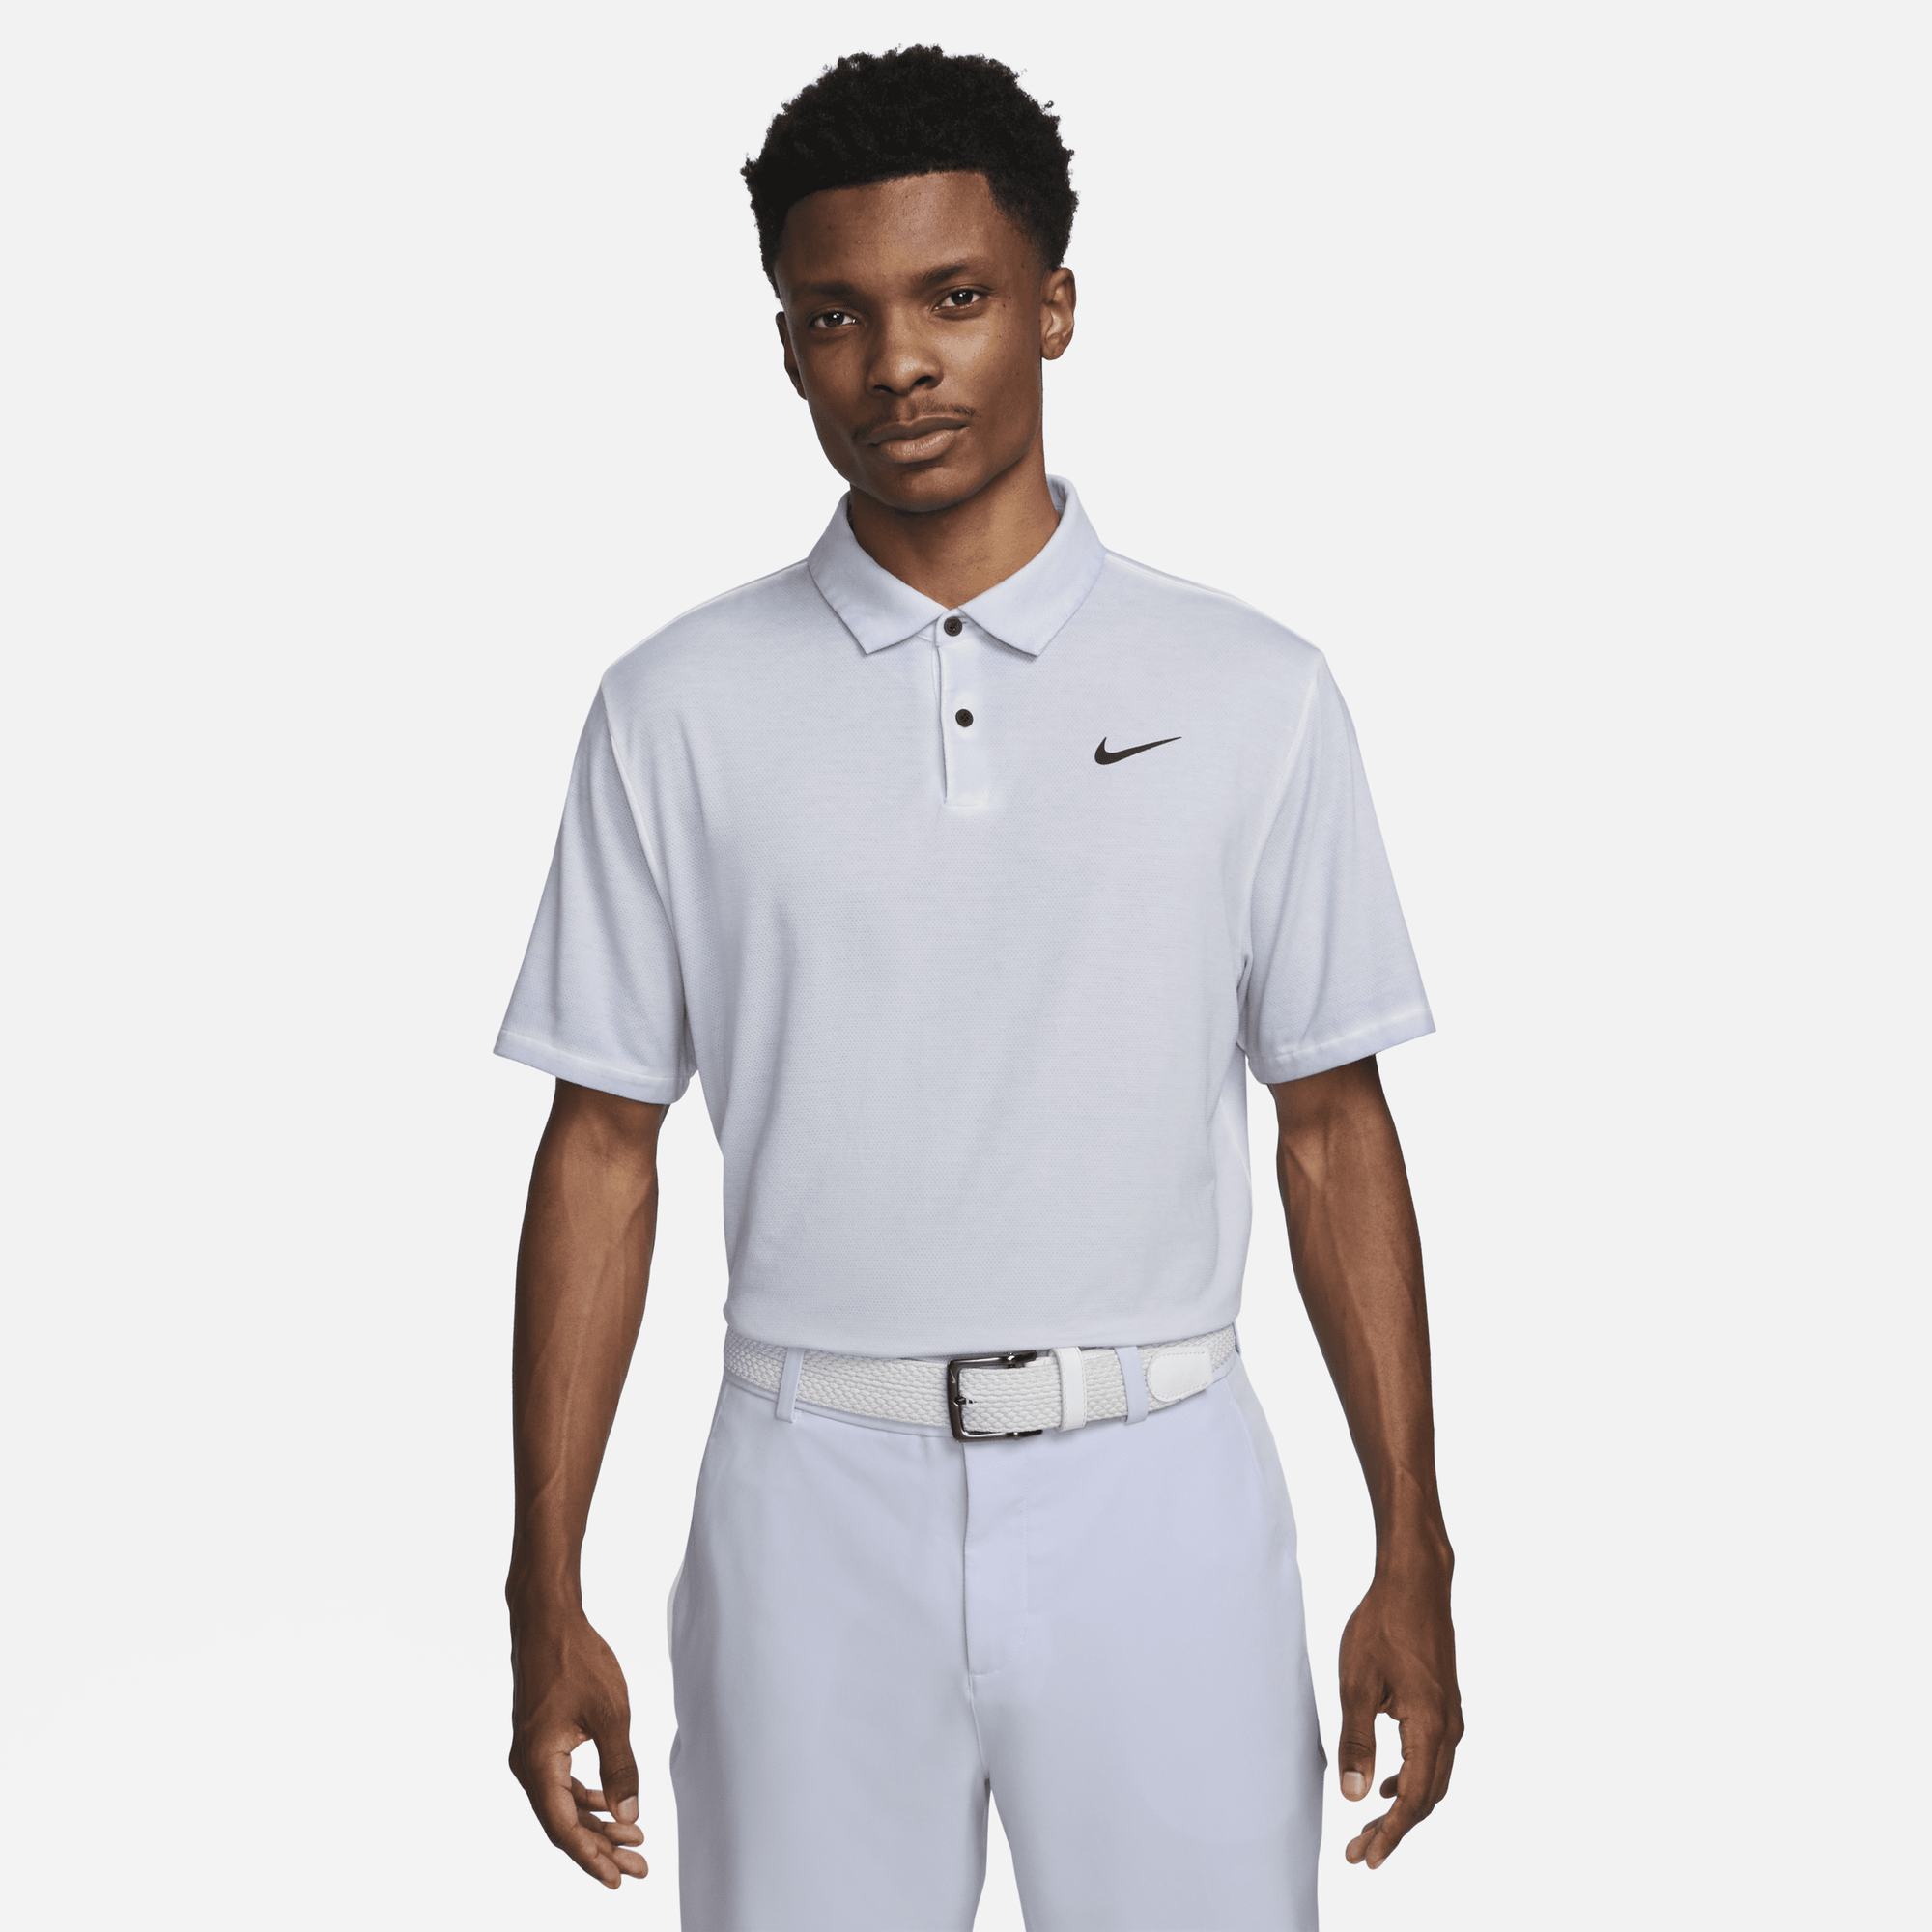 Buy Nike Dri-FIT Tour Men's Washed Golf Polo | Nike UAE Official